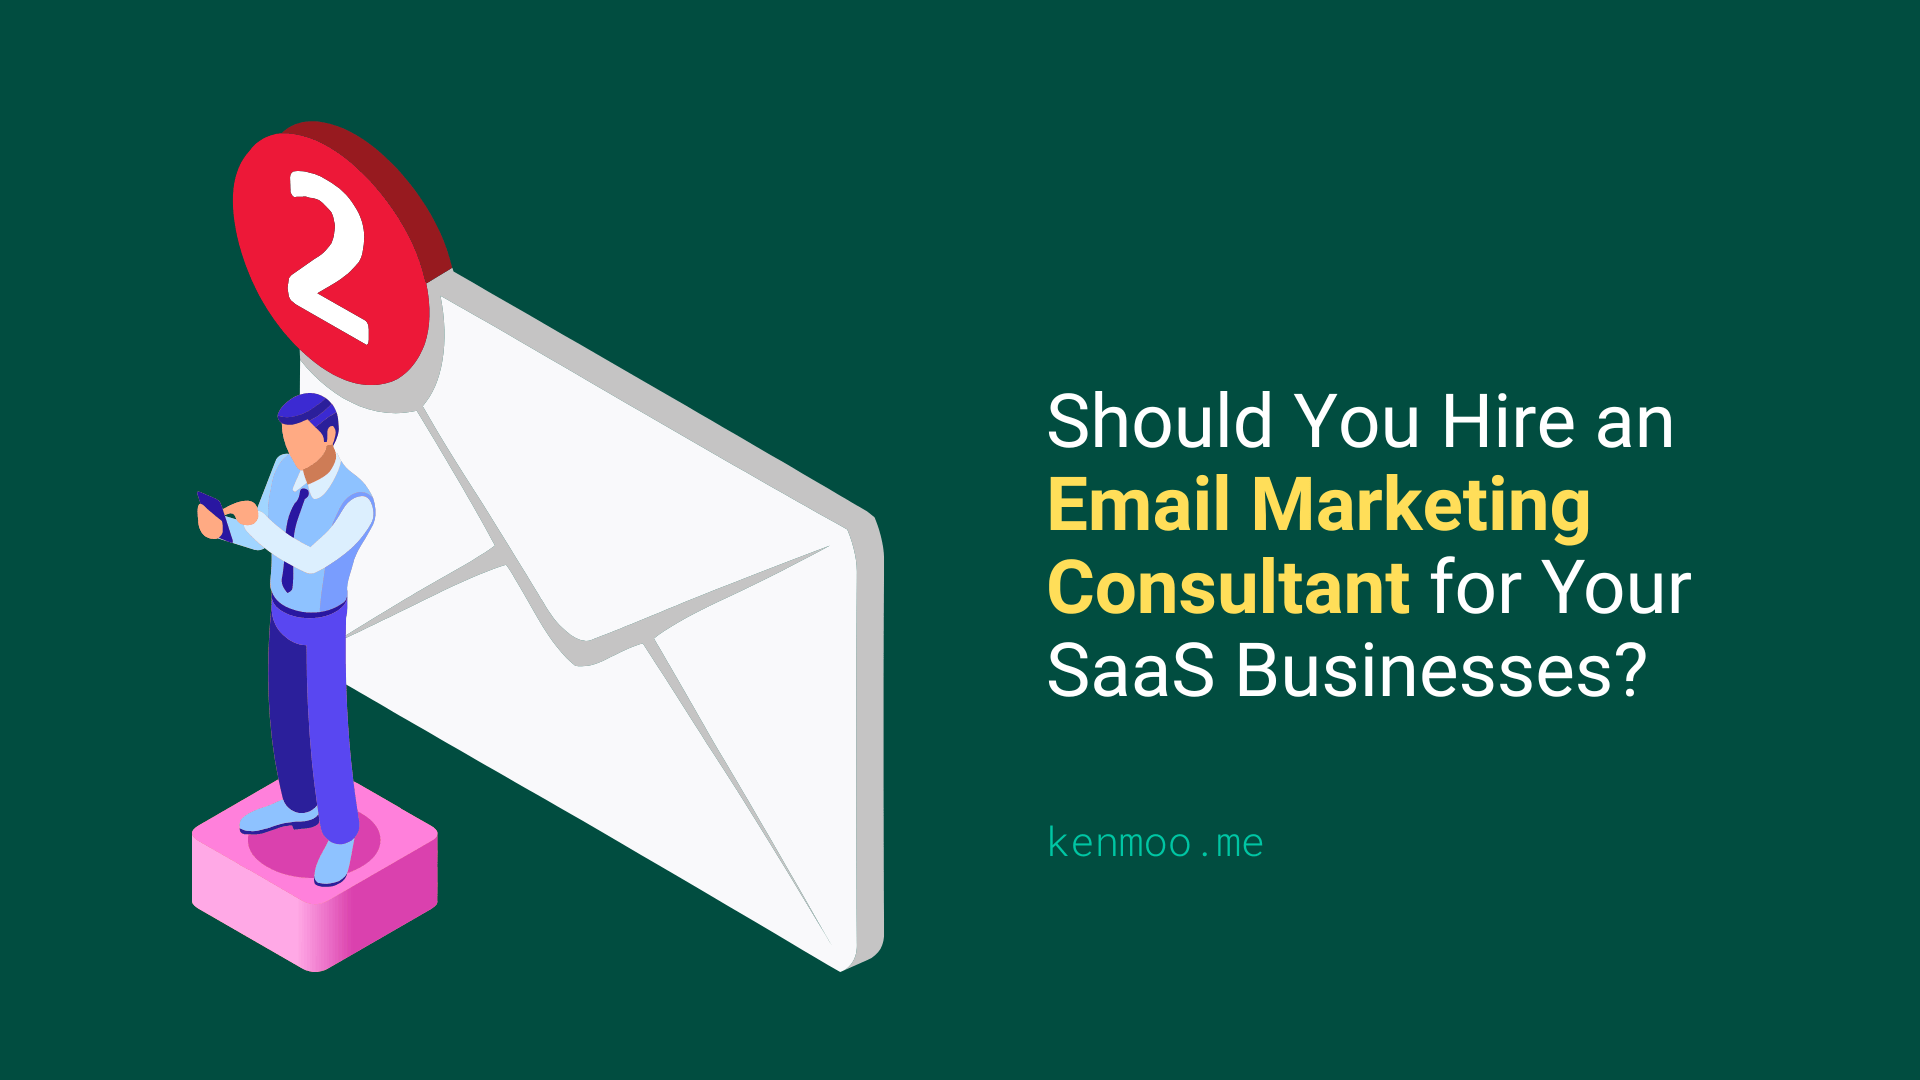 Should You Hire an Email Marketing Consultant for Your SaaS Businesses?